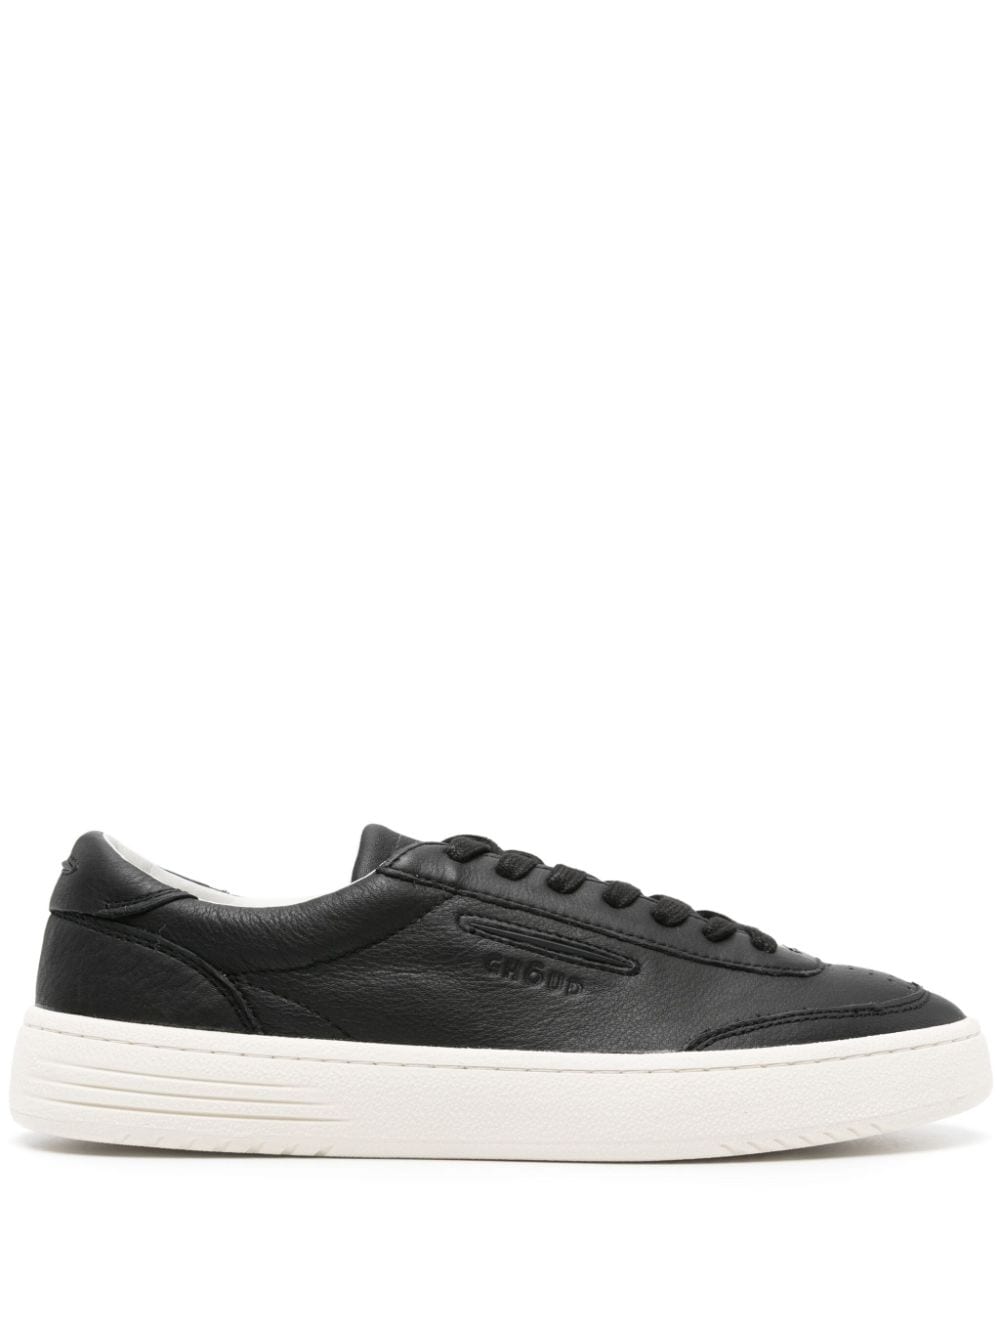 Lido leather sneakers